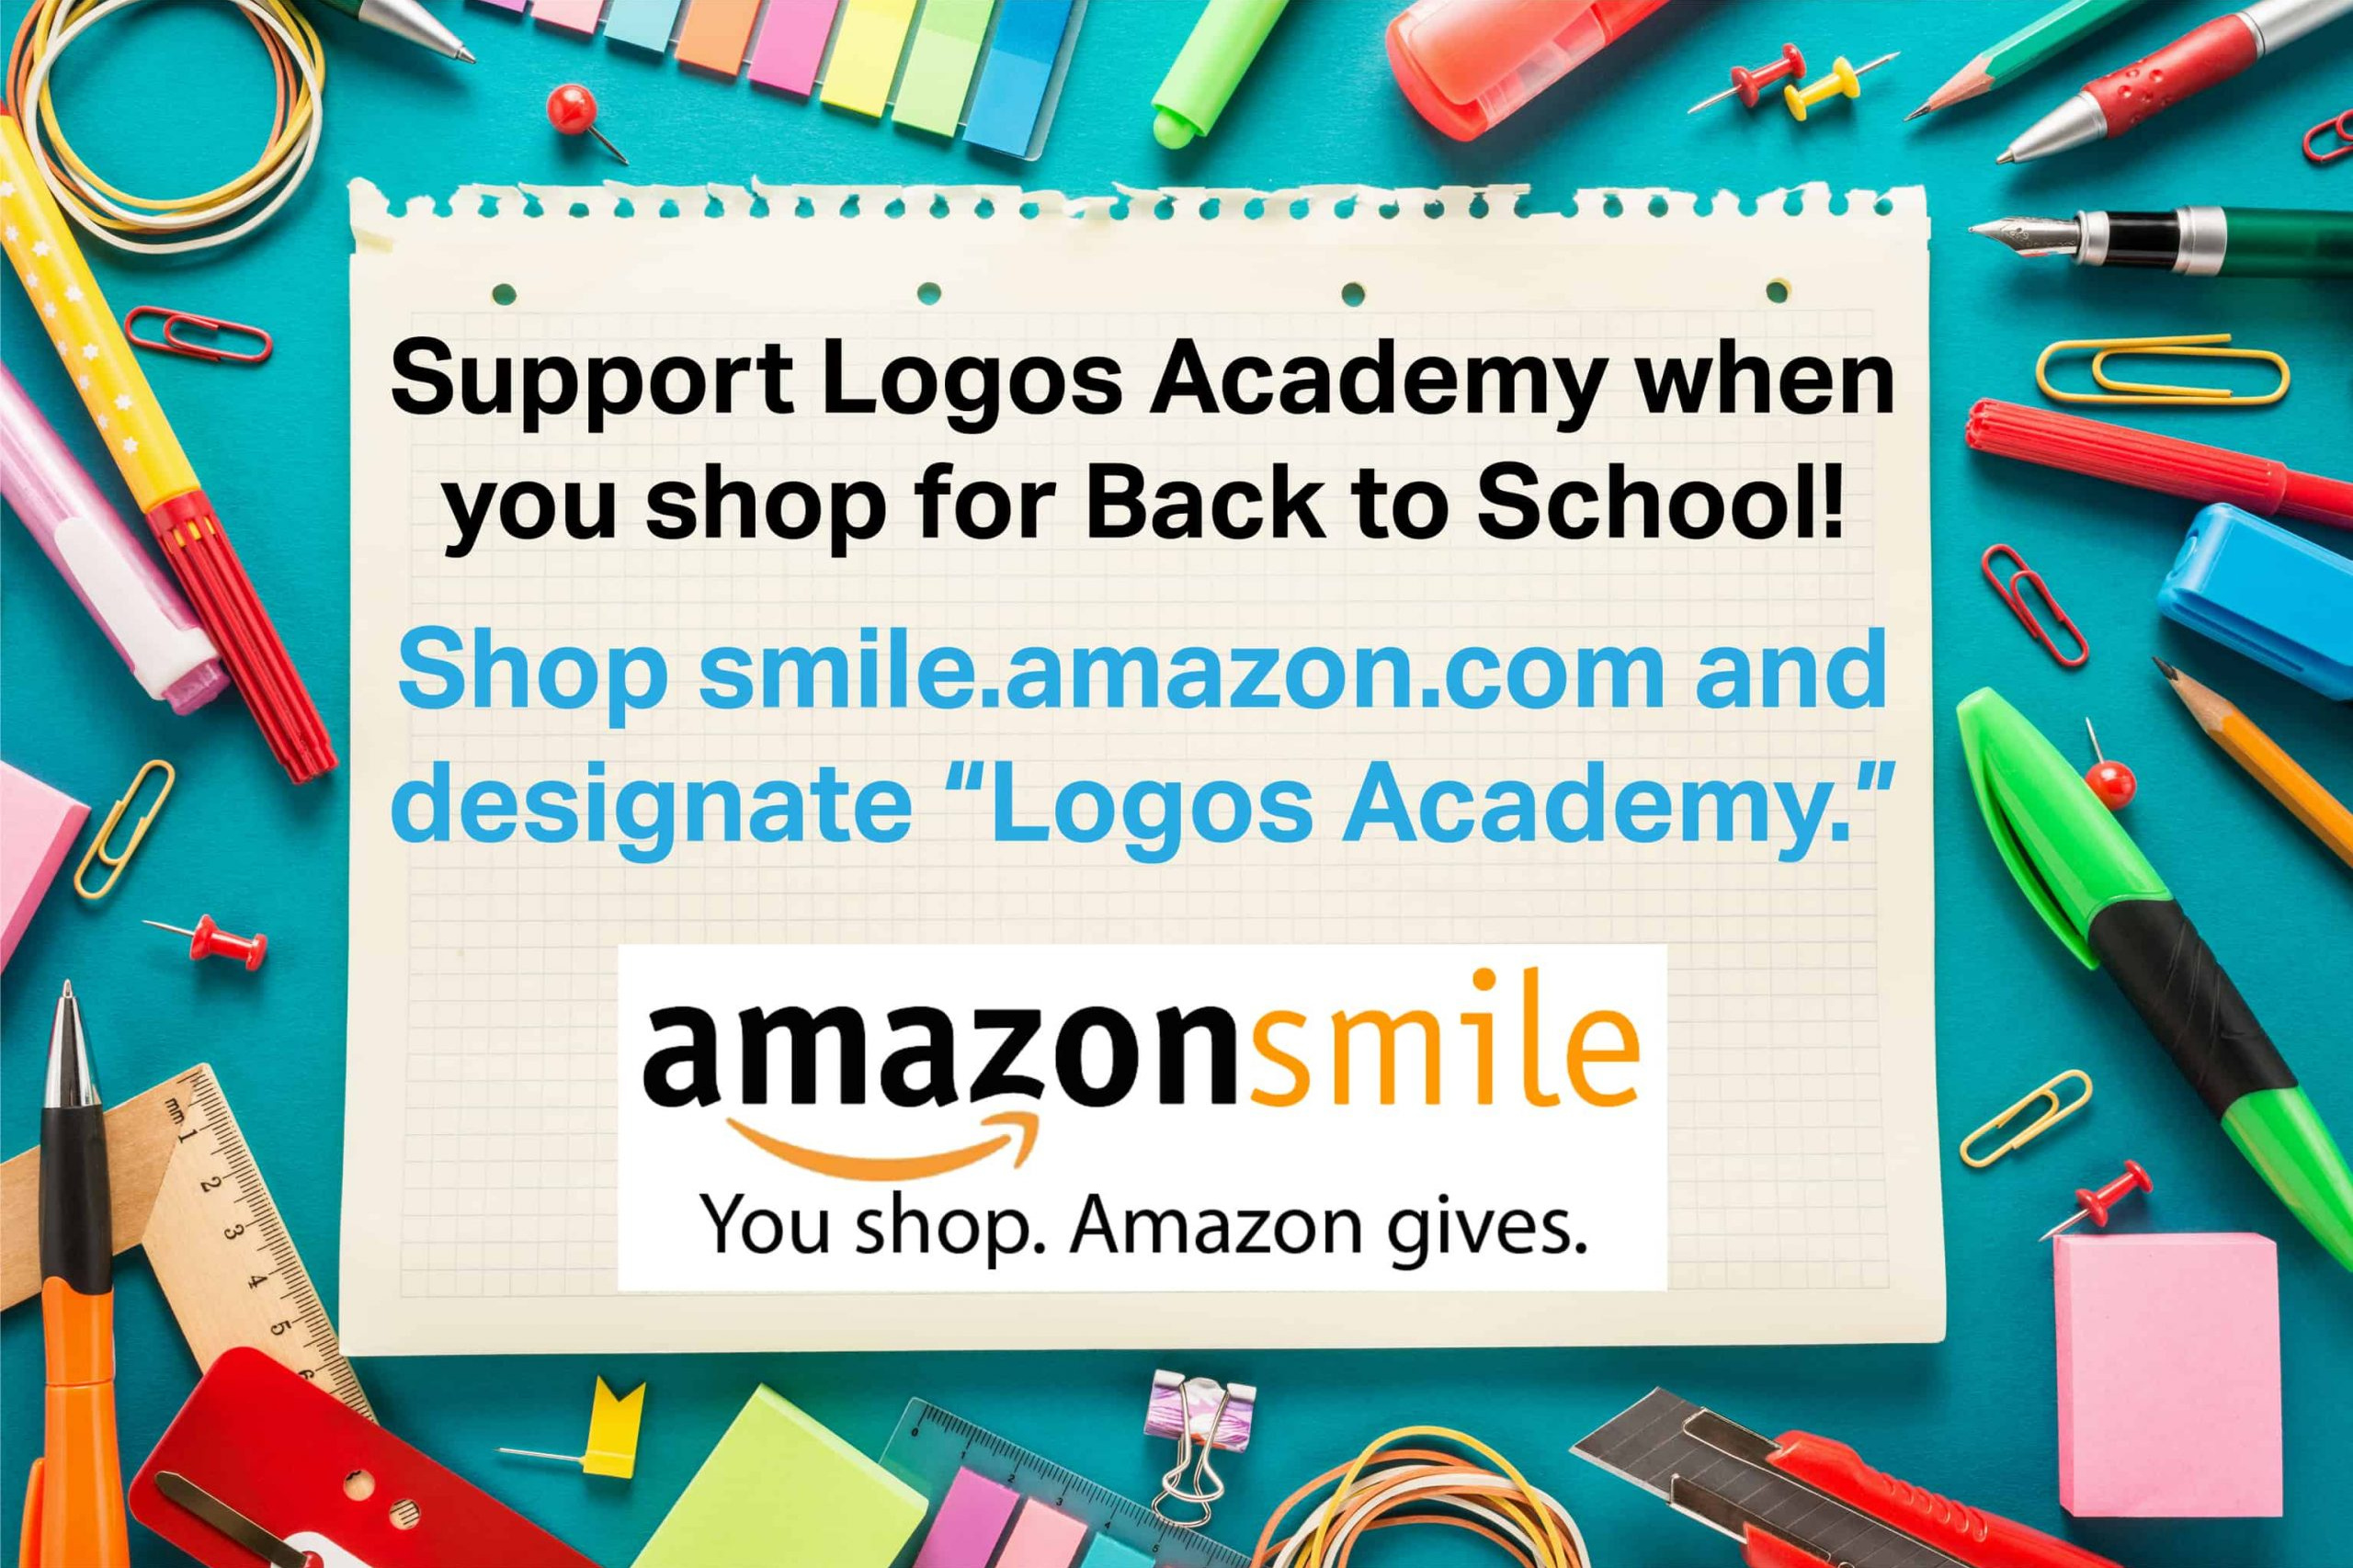 Shop Amazon and support Logos Academy